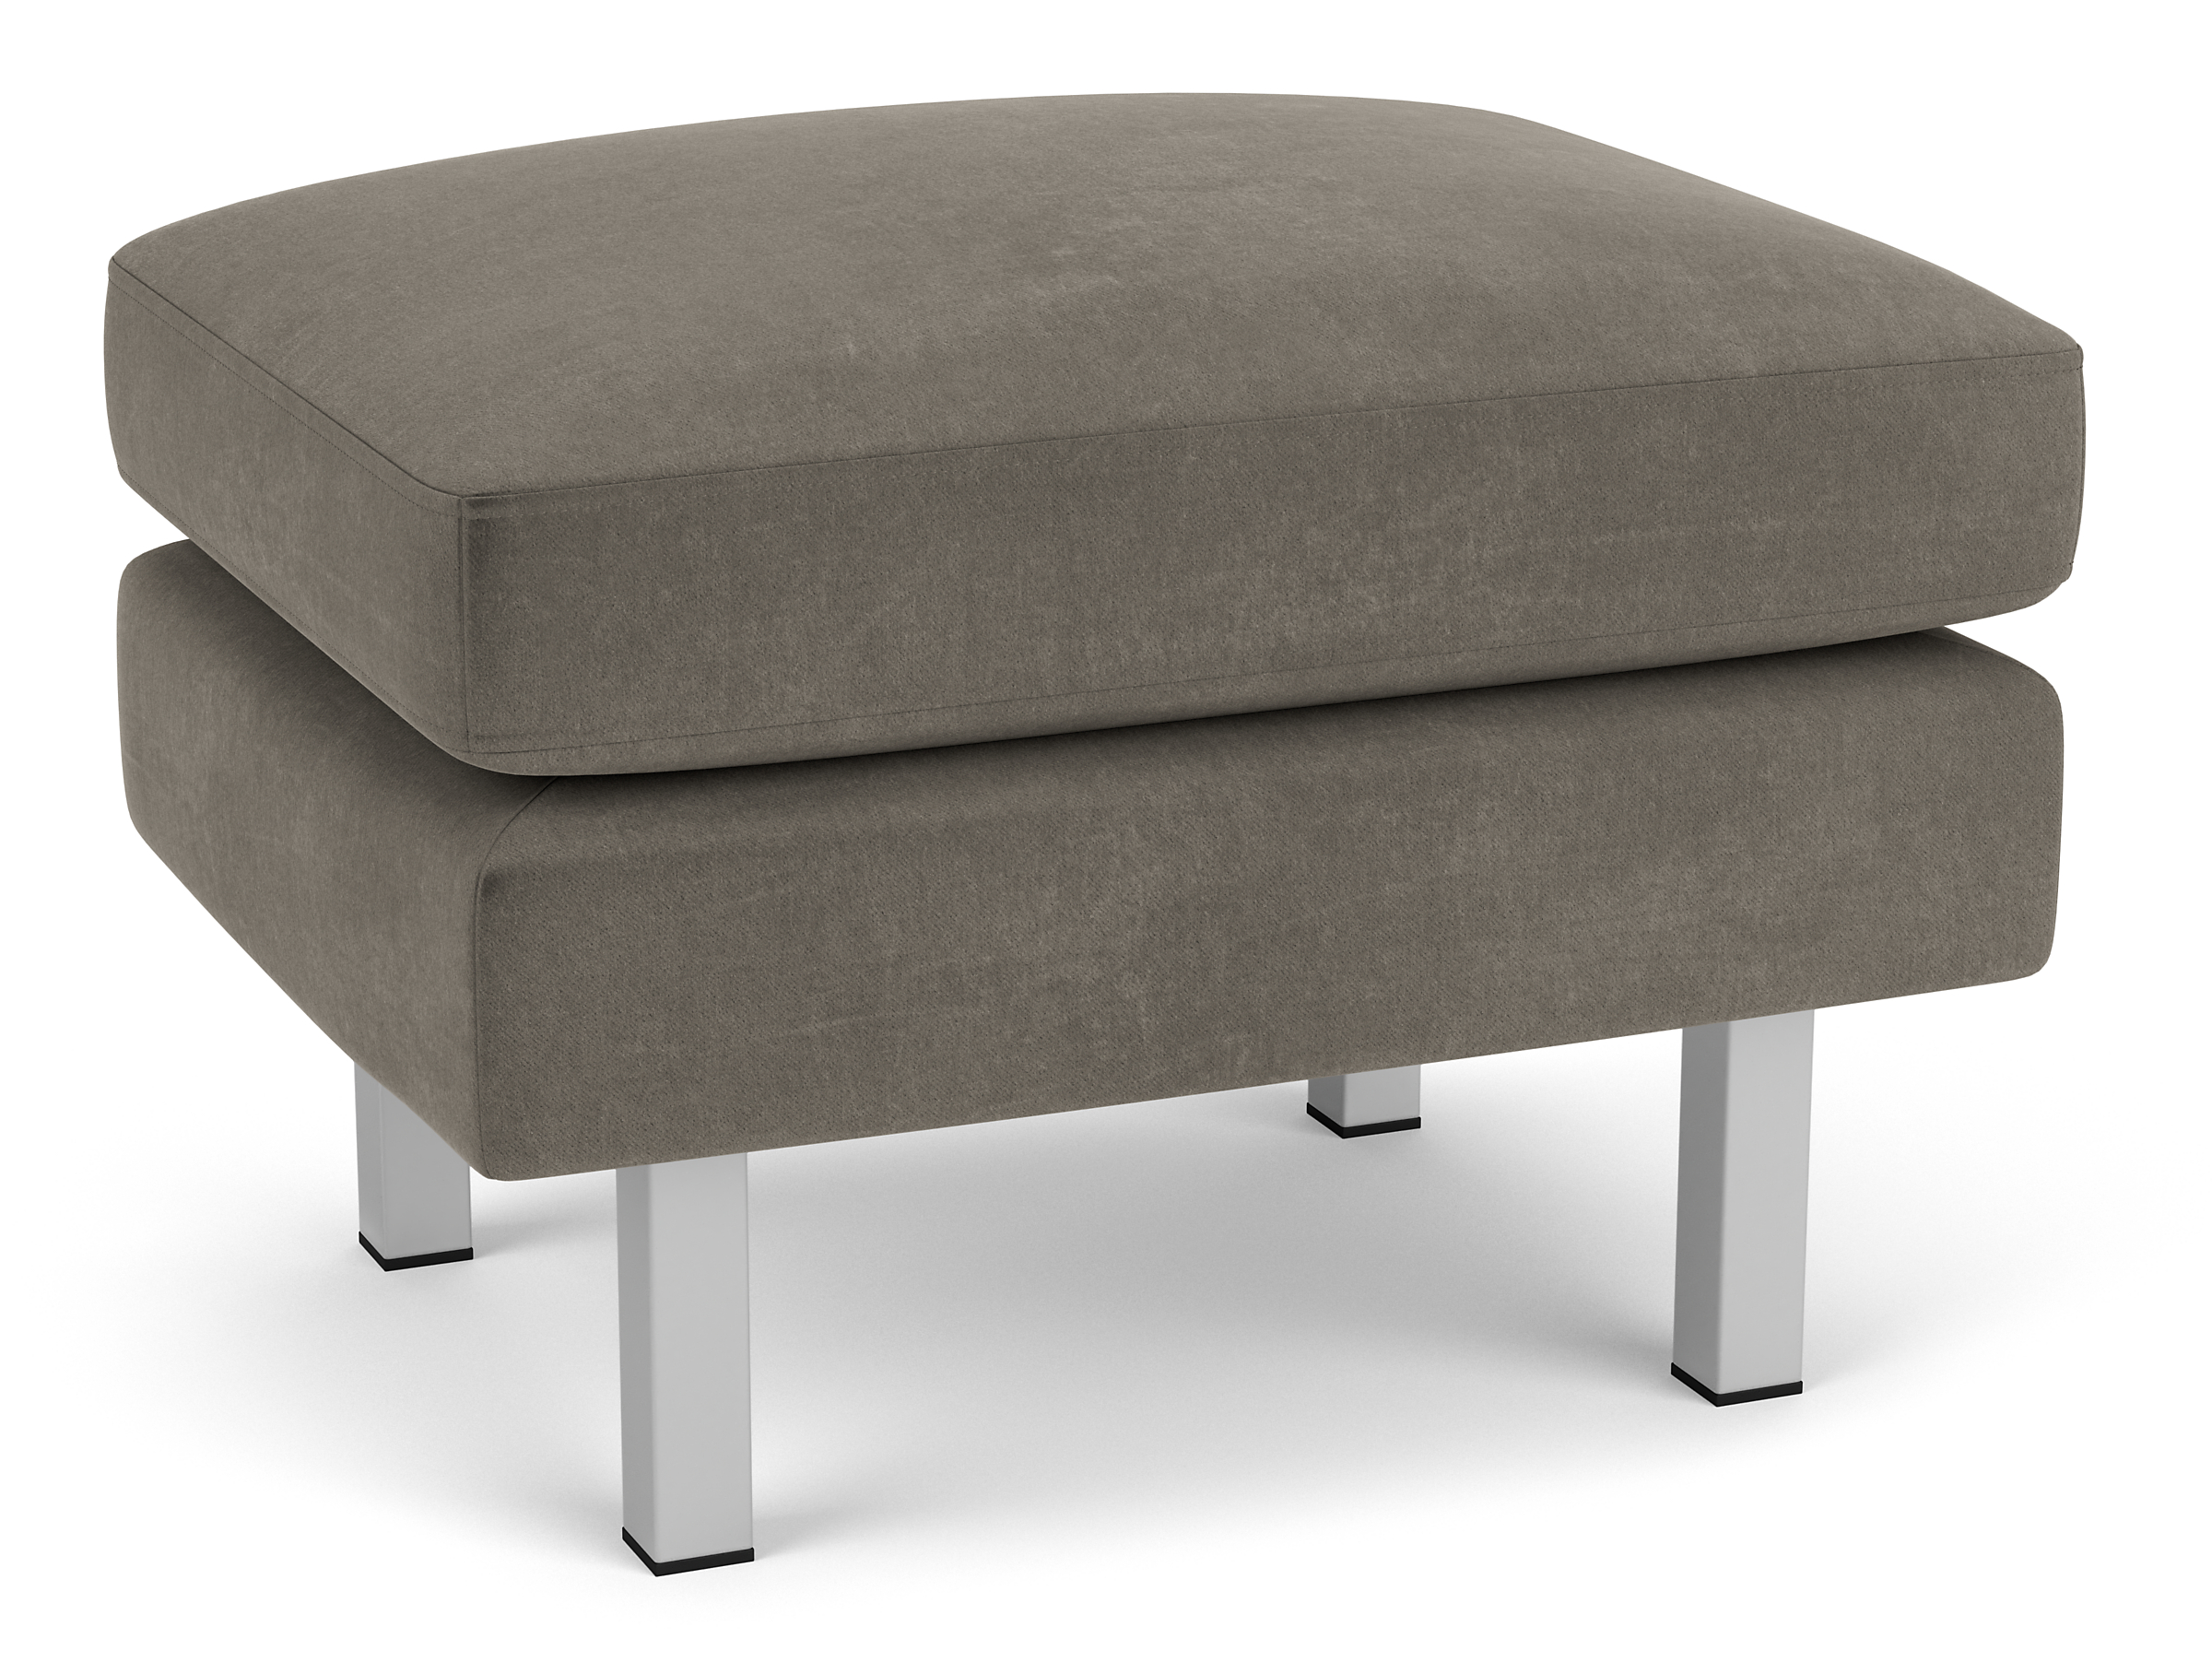 Jasper 27w 20d 18h Ottoman in Banks Charcoal with 1.5"sq Stainless Steel Legs